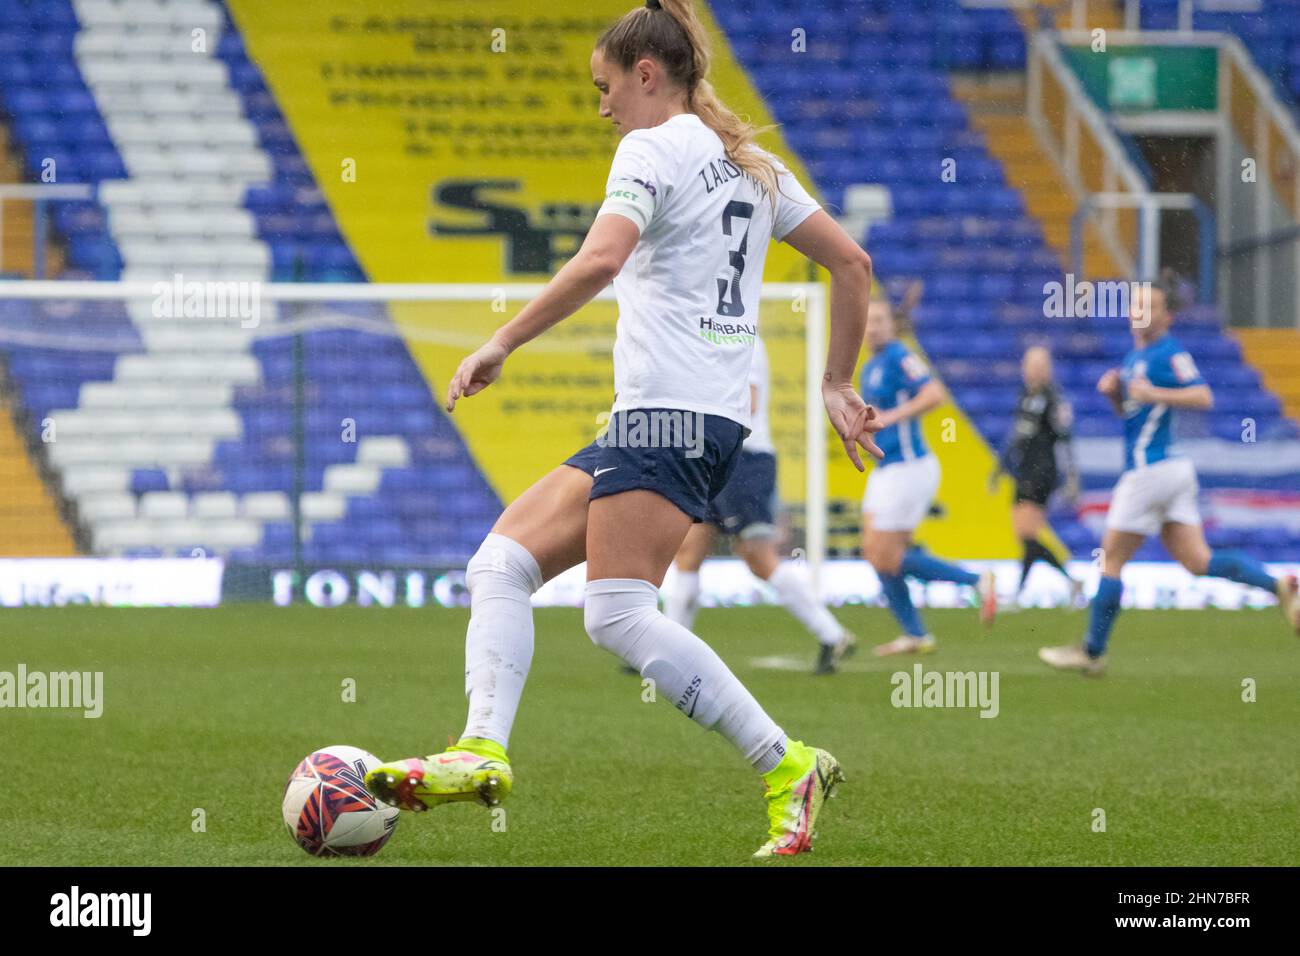 Shelina Zadorsky of Tottenham Hotspur advancing the ball out of defence Stock Photo